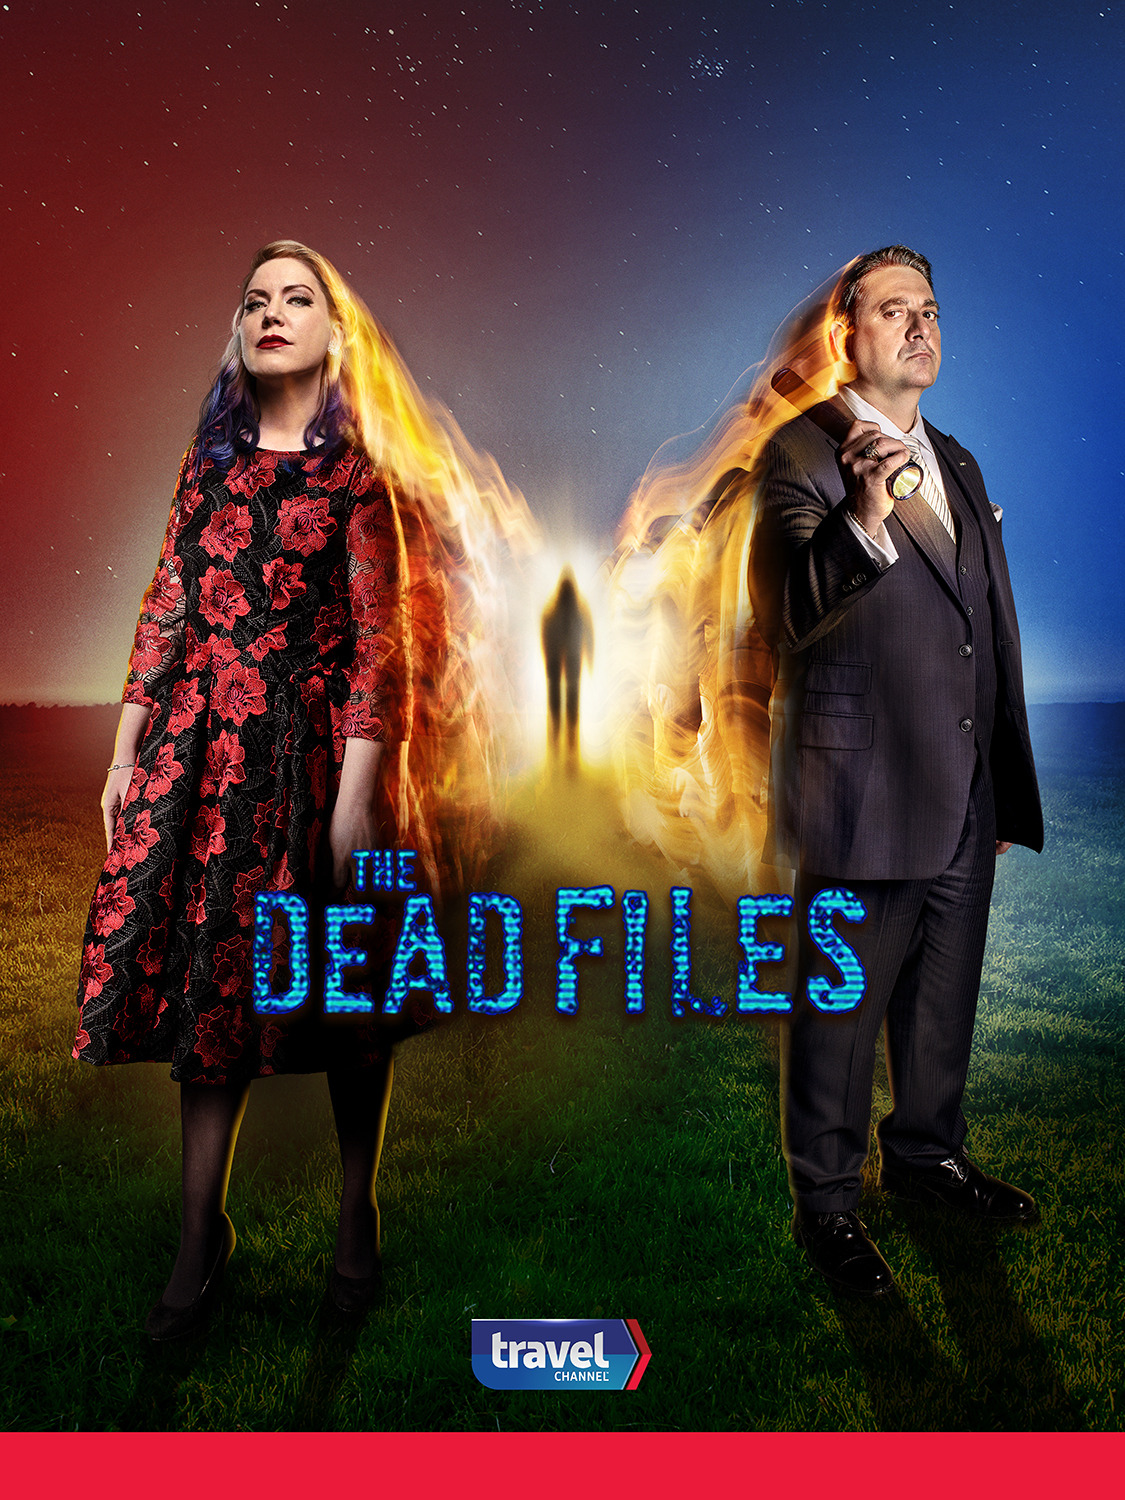 Extra Large TV Poster Image for The Dead Files (#5 of 8)